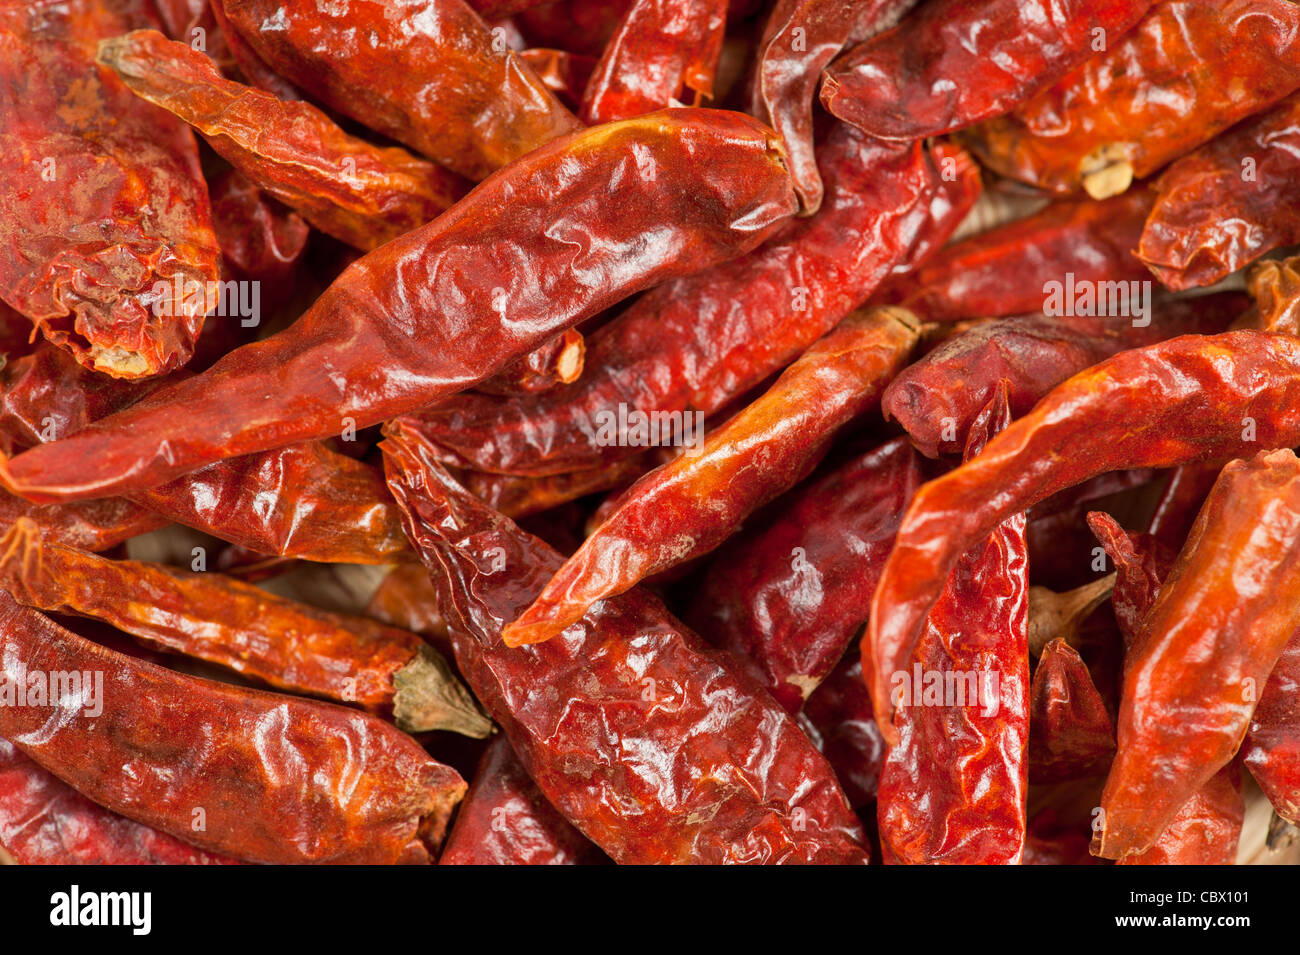 Dried chili peppers Stock Photo